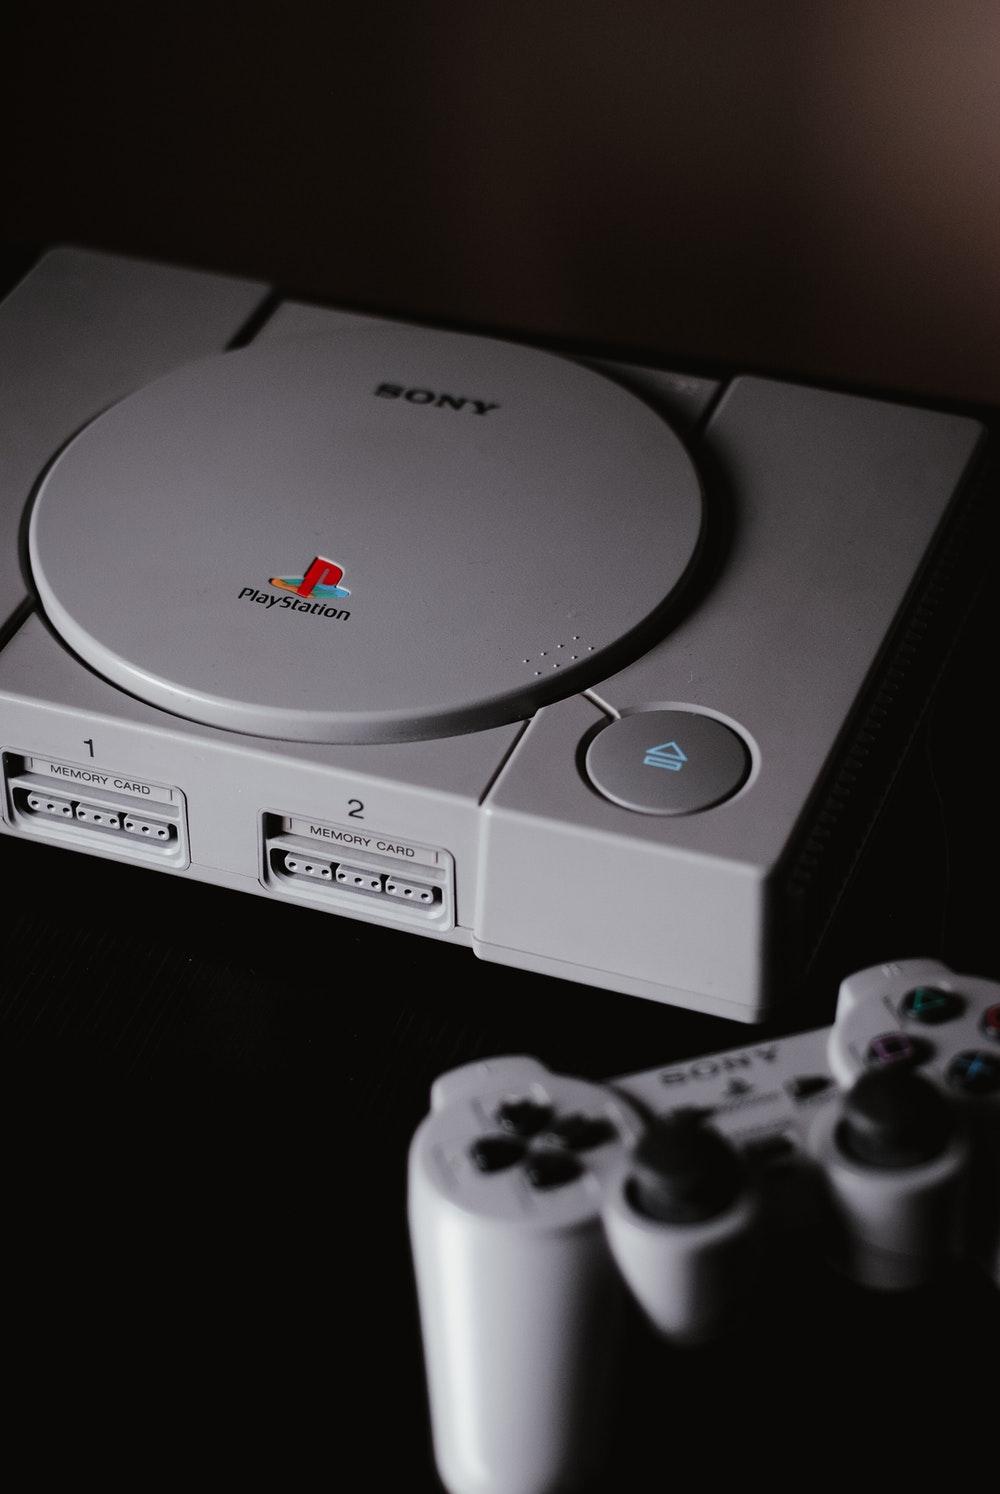 Ps1 Picture. Download Free Image